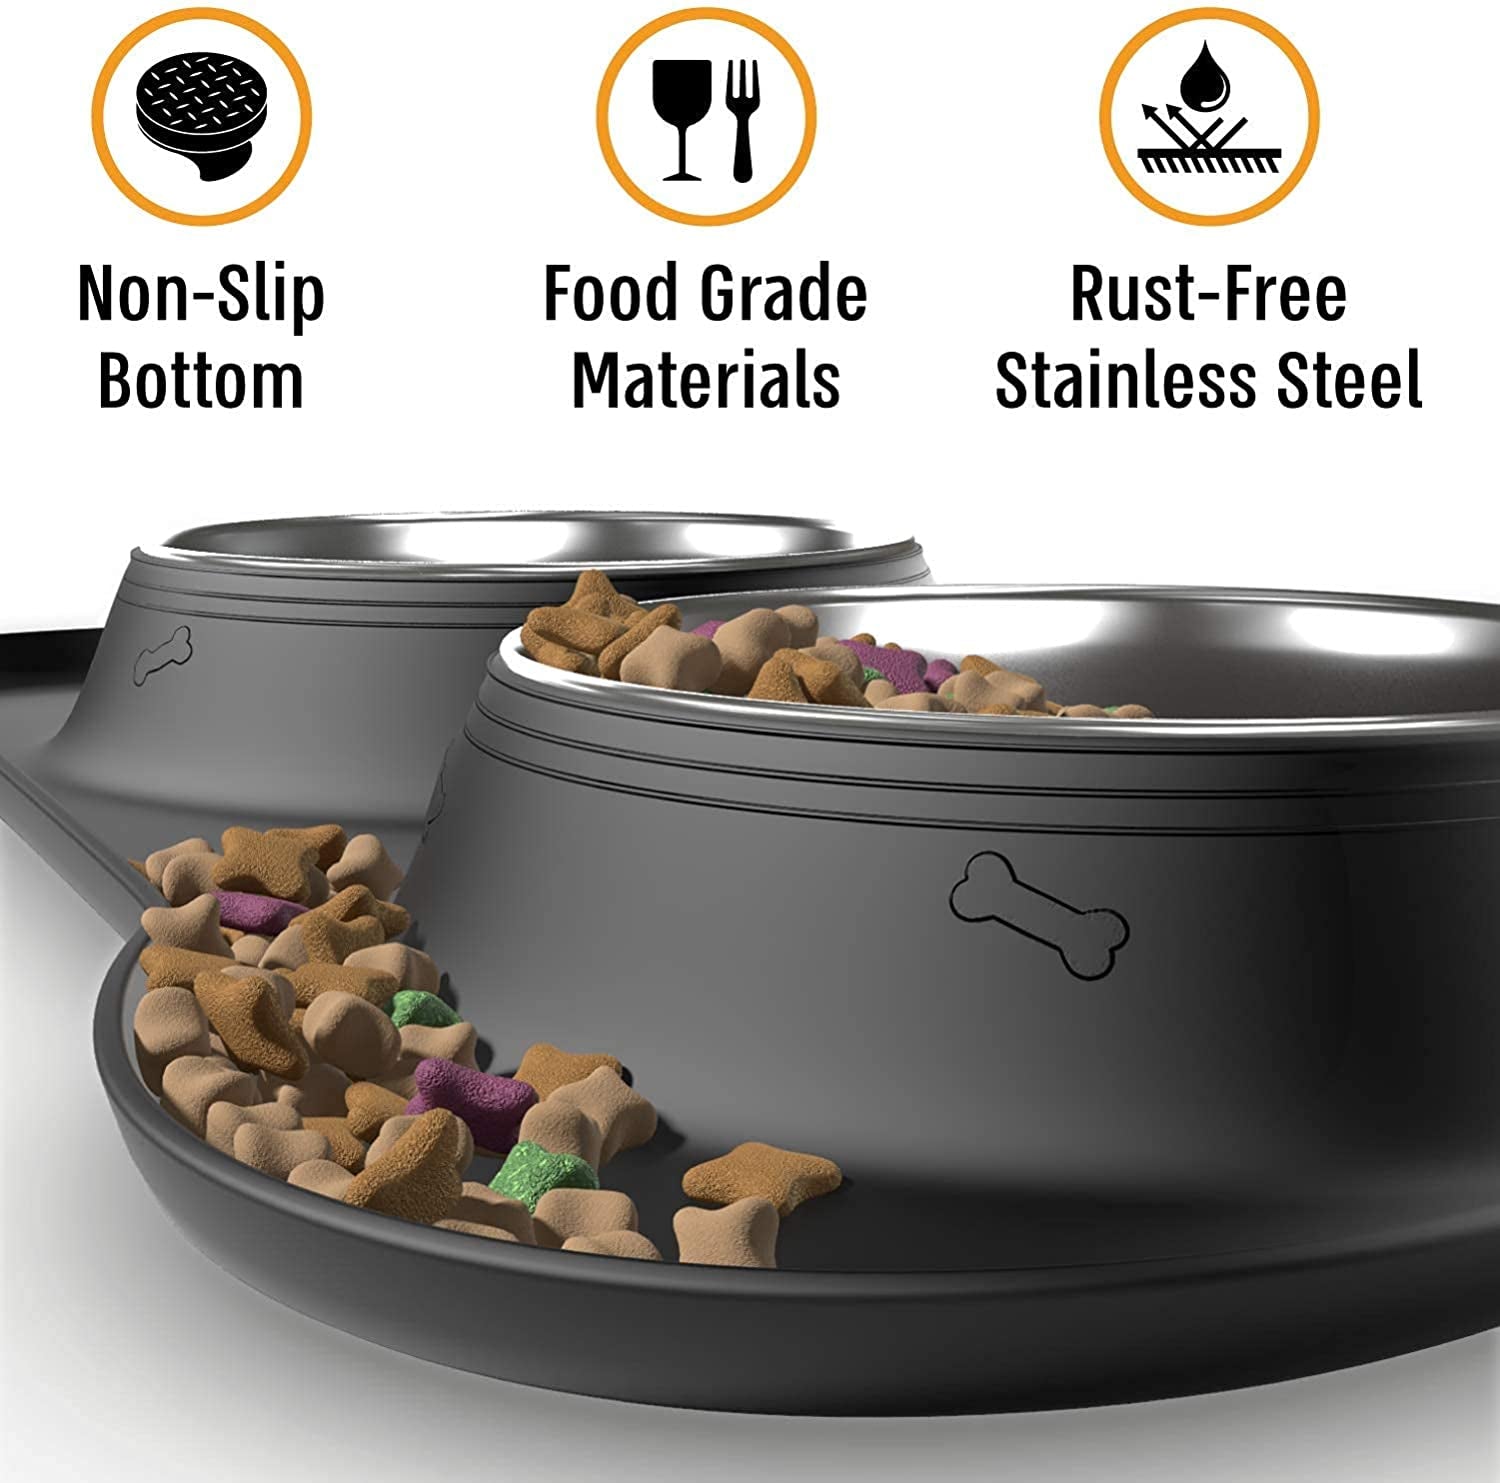 Dog Bowl Set, Stainless Steel No Spill Mess-Proof Food & Water Dog Food Bowls with Skid Resistant Silicone Mat, Dog Bowls Small Size Dog, Medium, & Large, Pet Puppy Bowls & Dog Dishes